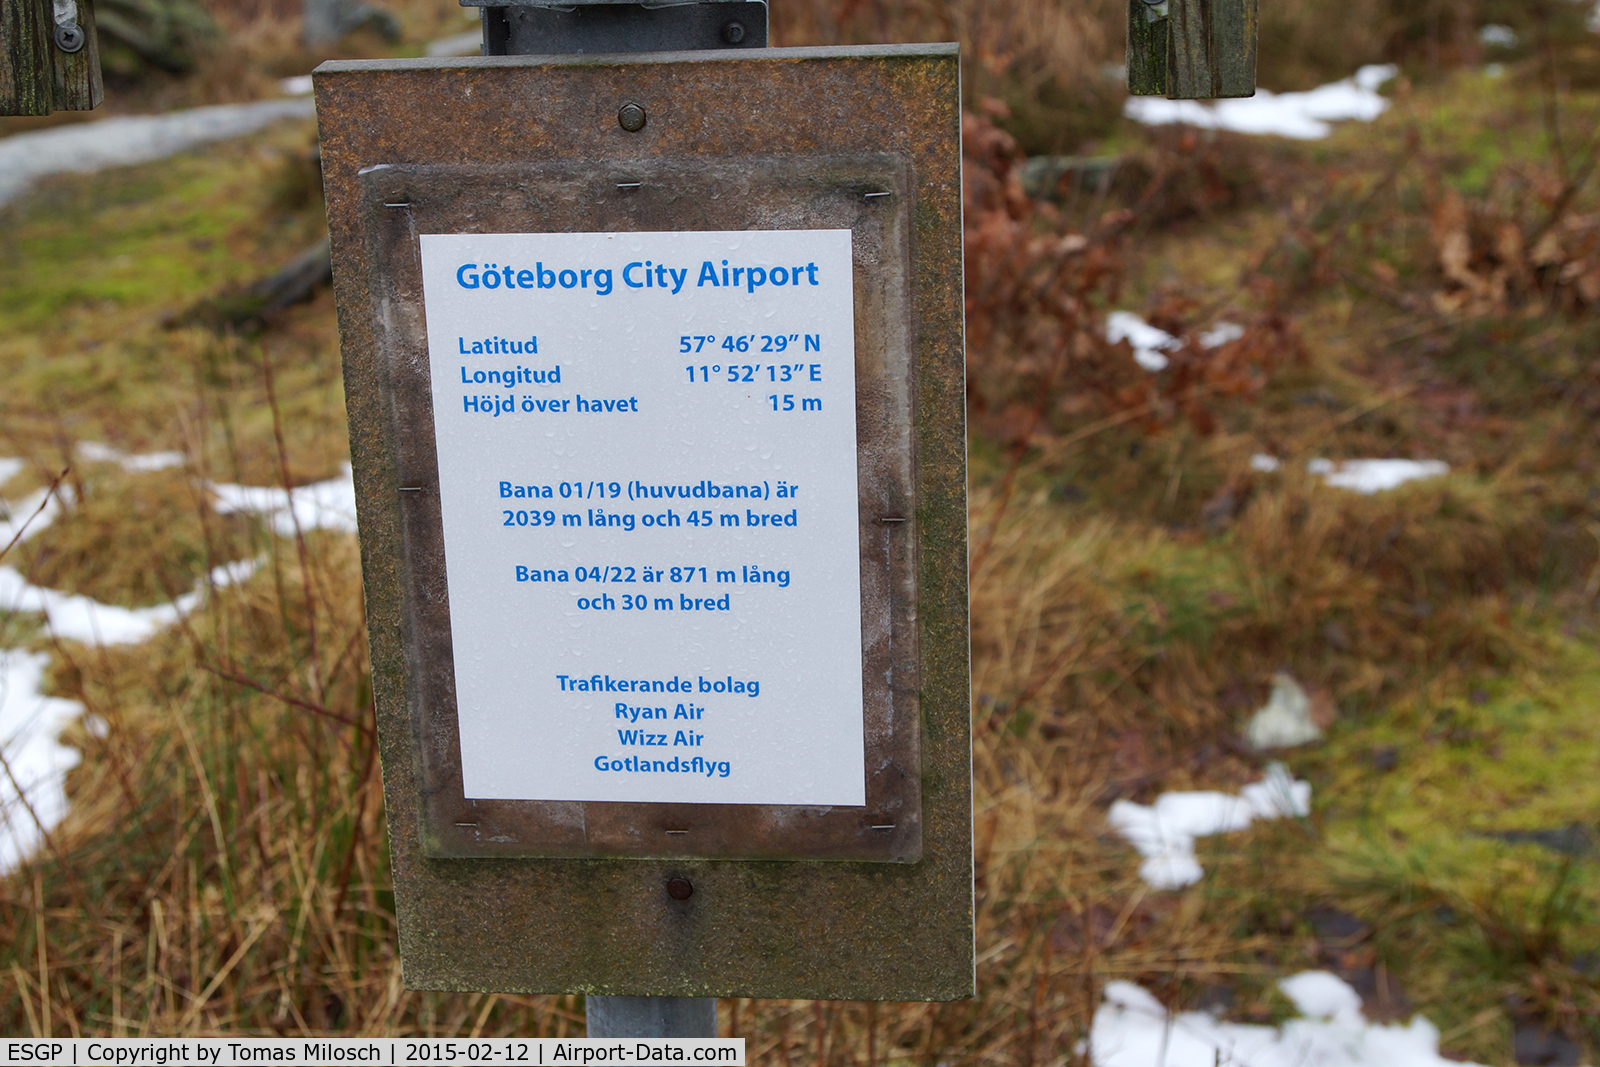 Göteborg City Airport (Säve), Göteborg Sweden (ESGP) - In the end of the year 2014 all scheduled flight were moved to GOT. 